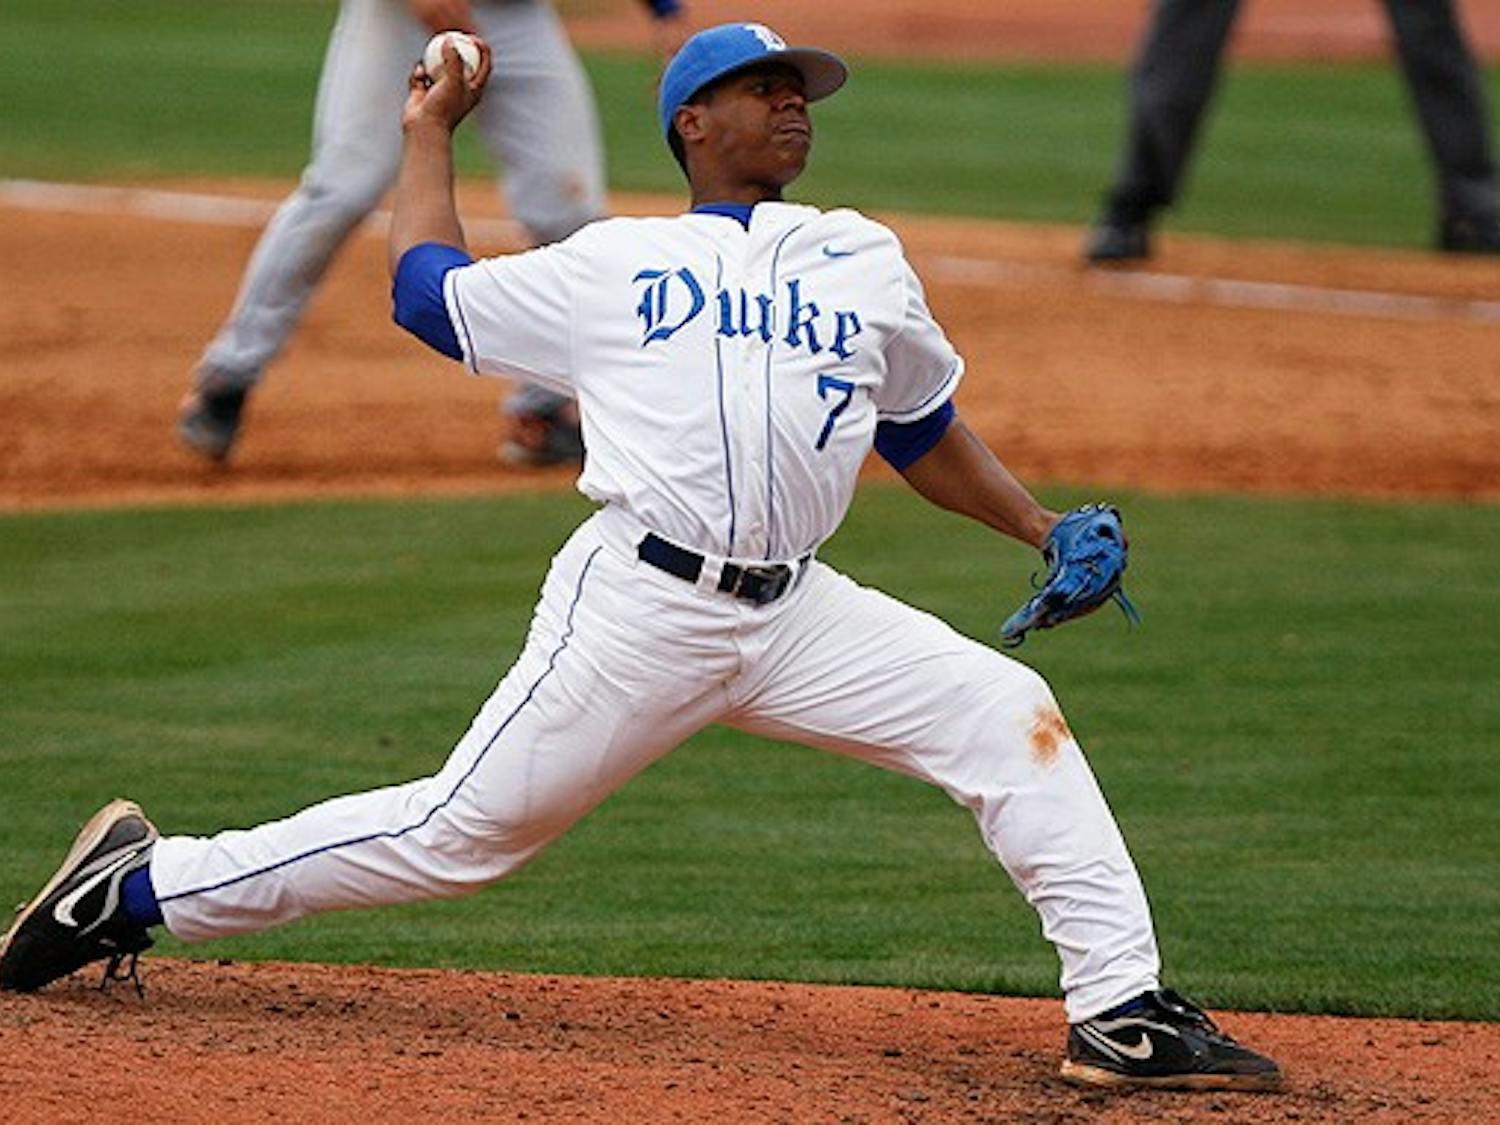 In his first career start, freshman Marcus Stroman struck out 10 en route to a 10-3 complete game win.